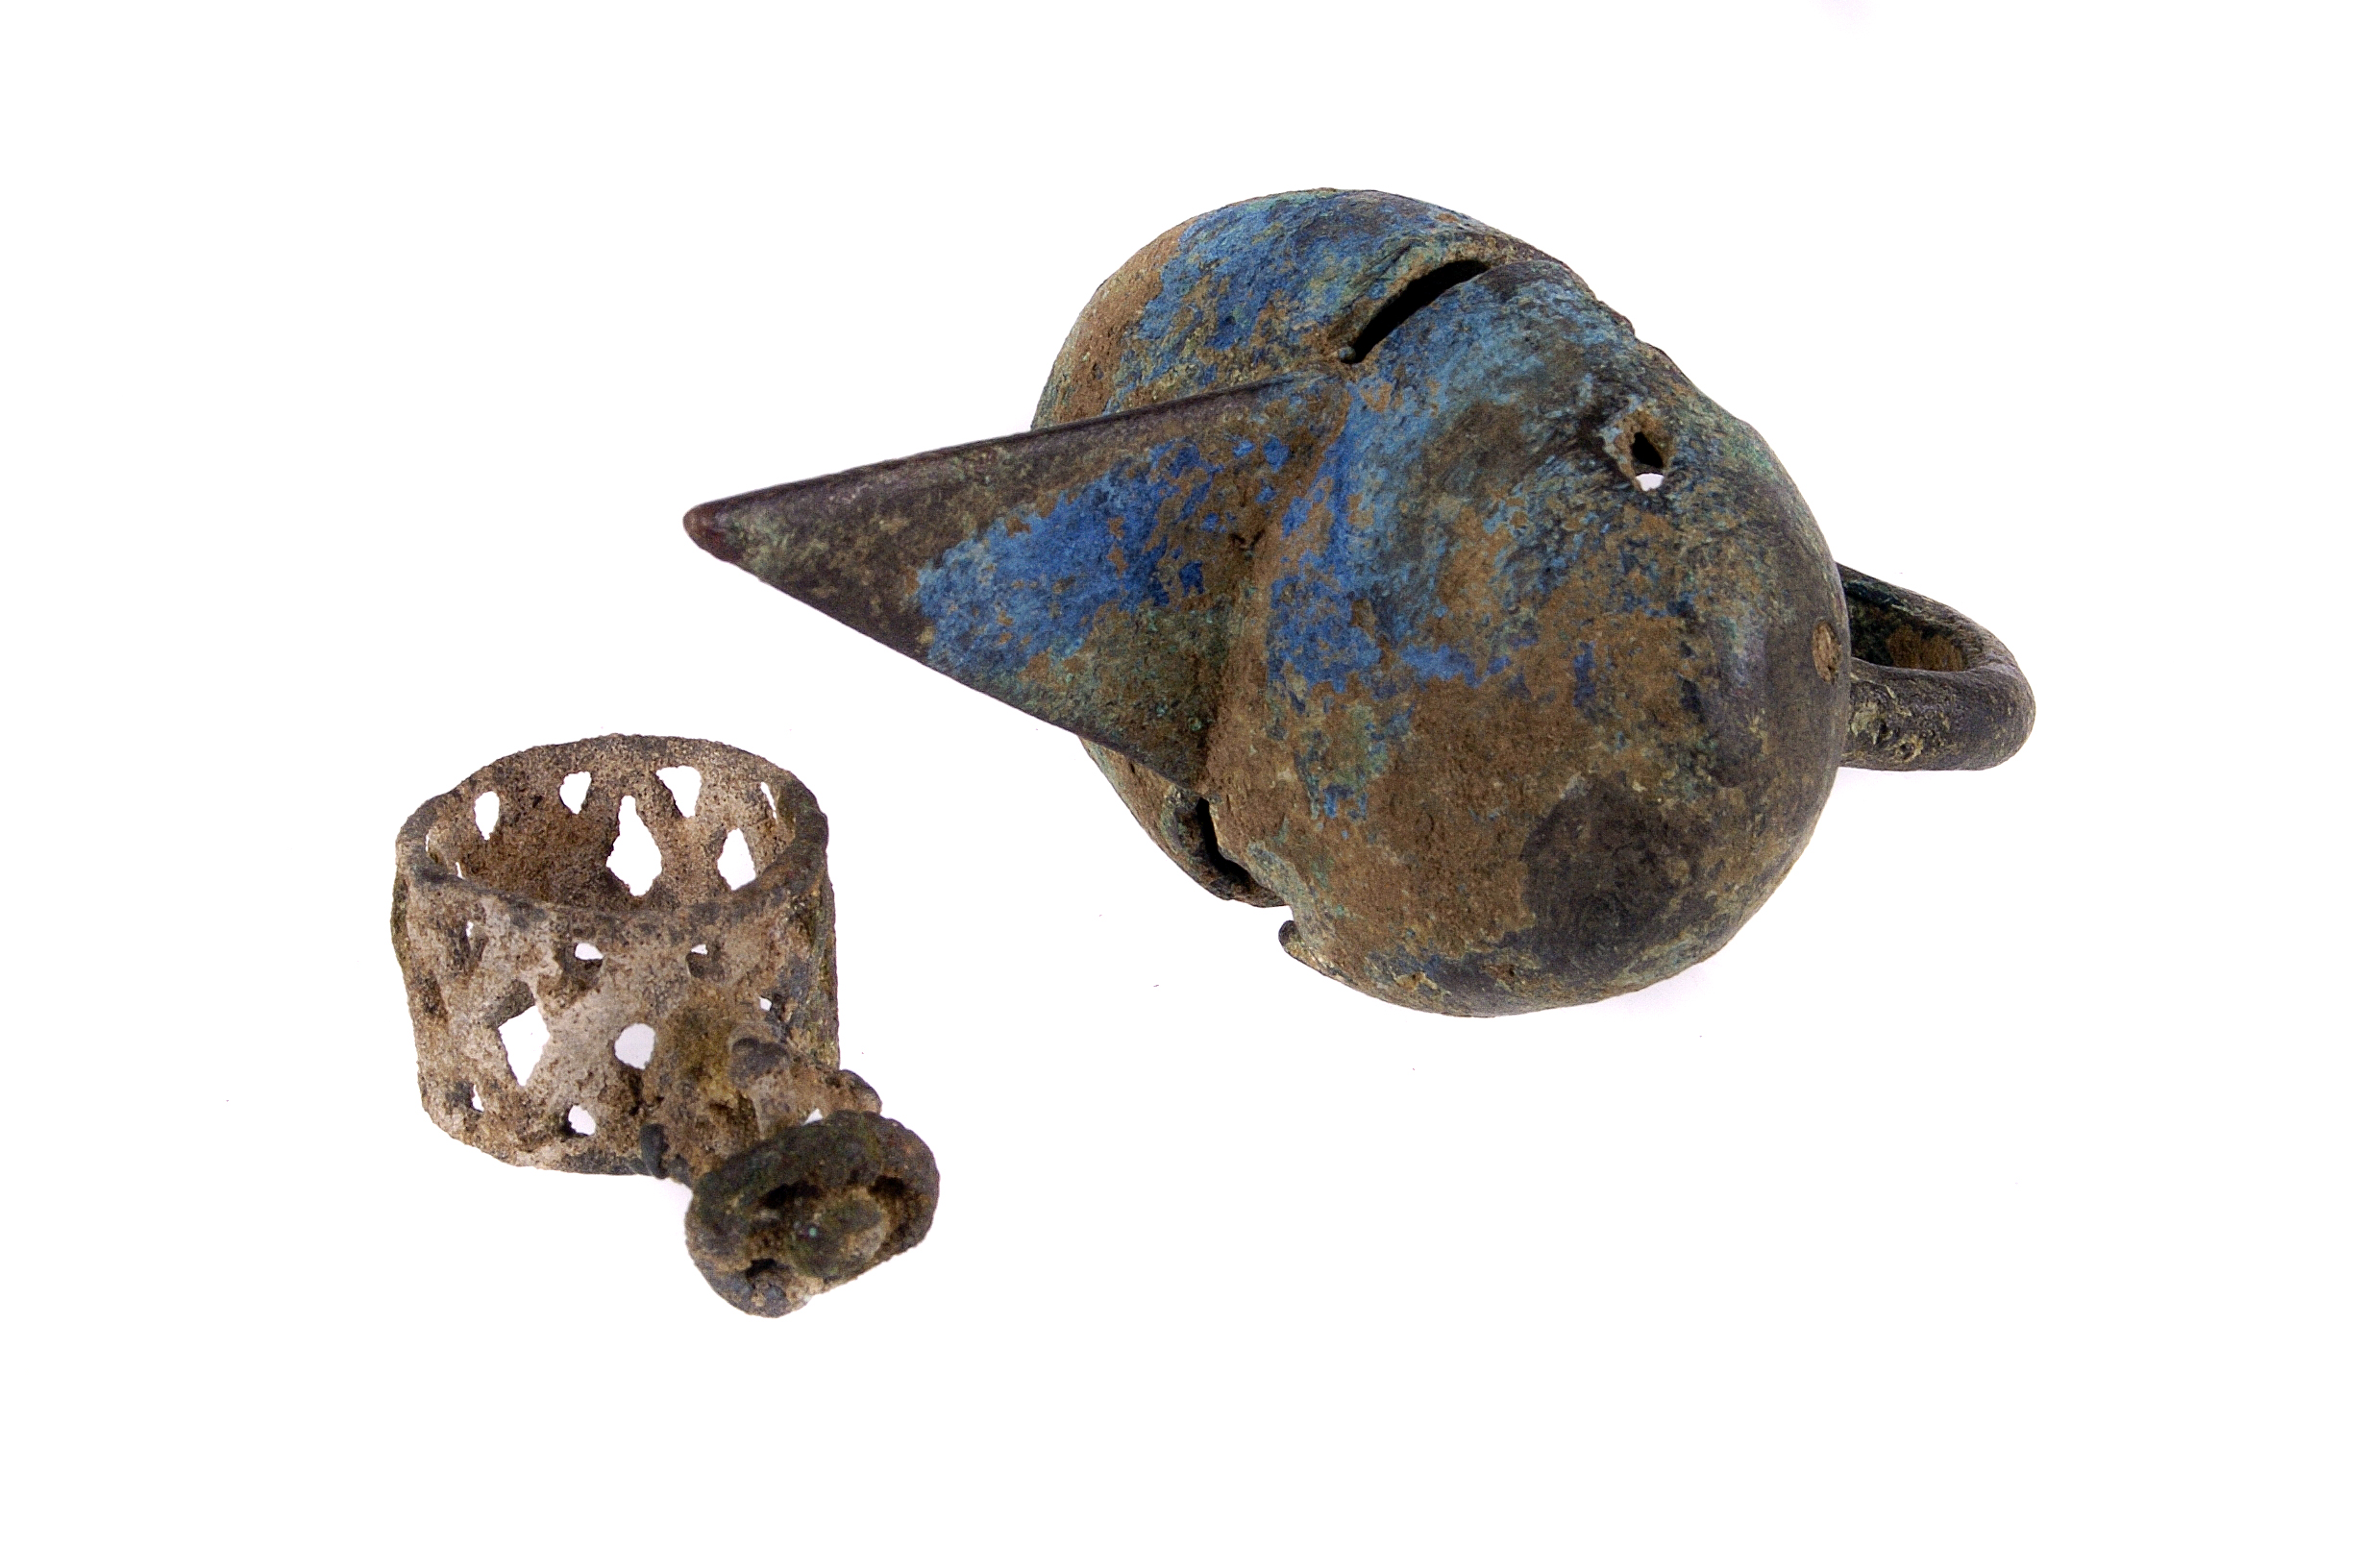 Two Malian copper alloy Dogon rings, one as a disk and cage on trellis shank, the other as a slotted